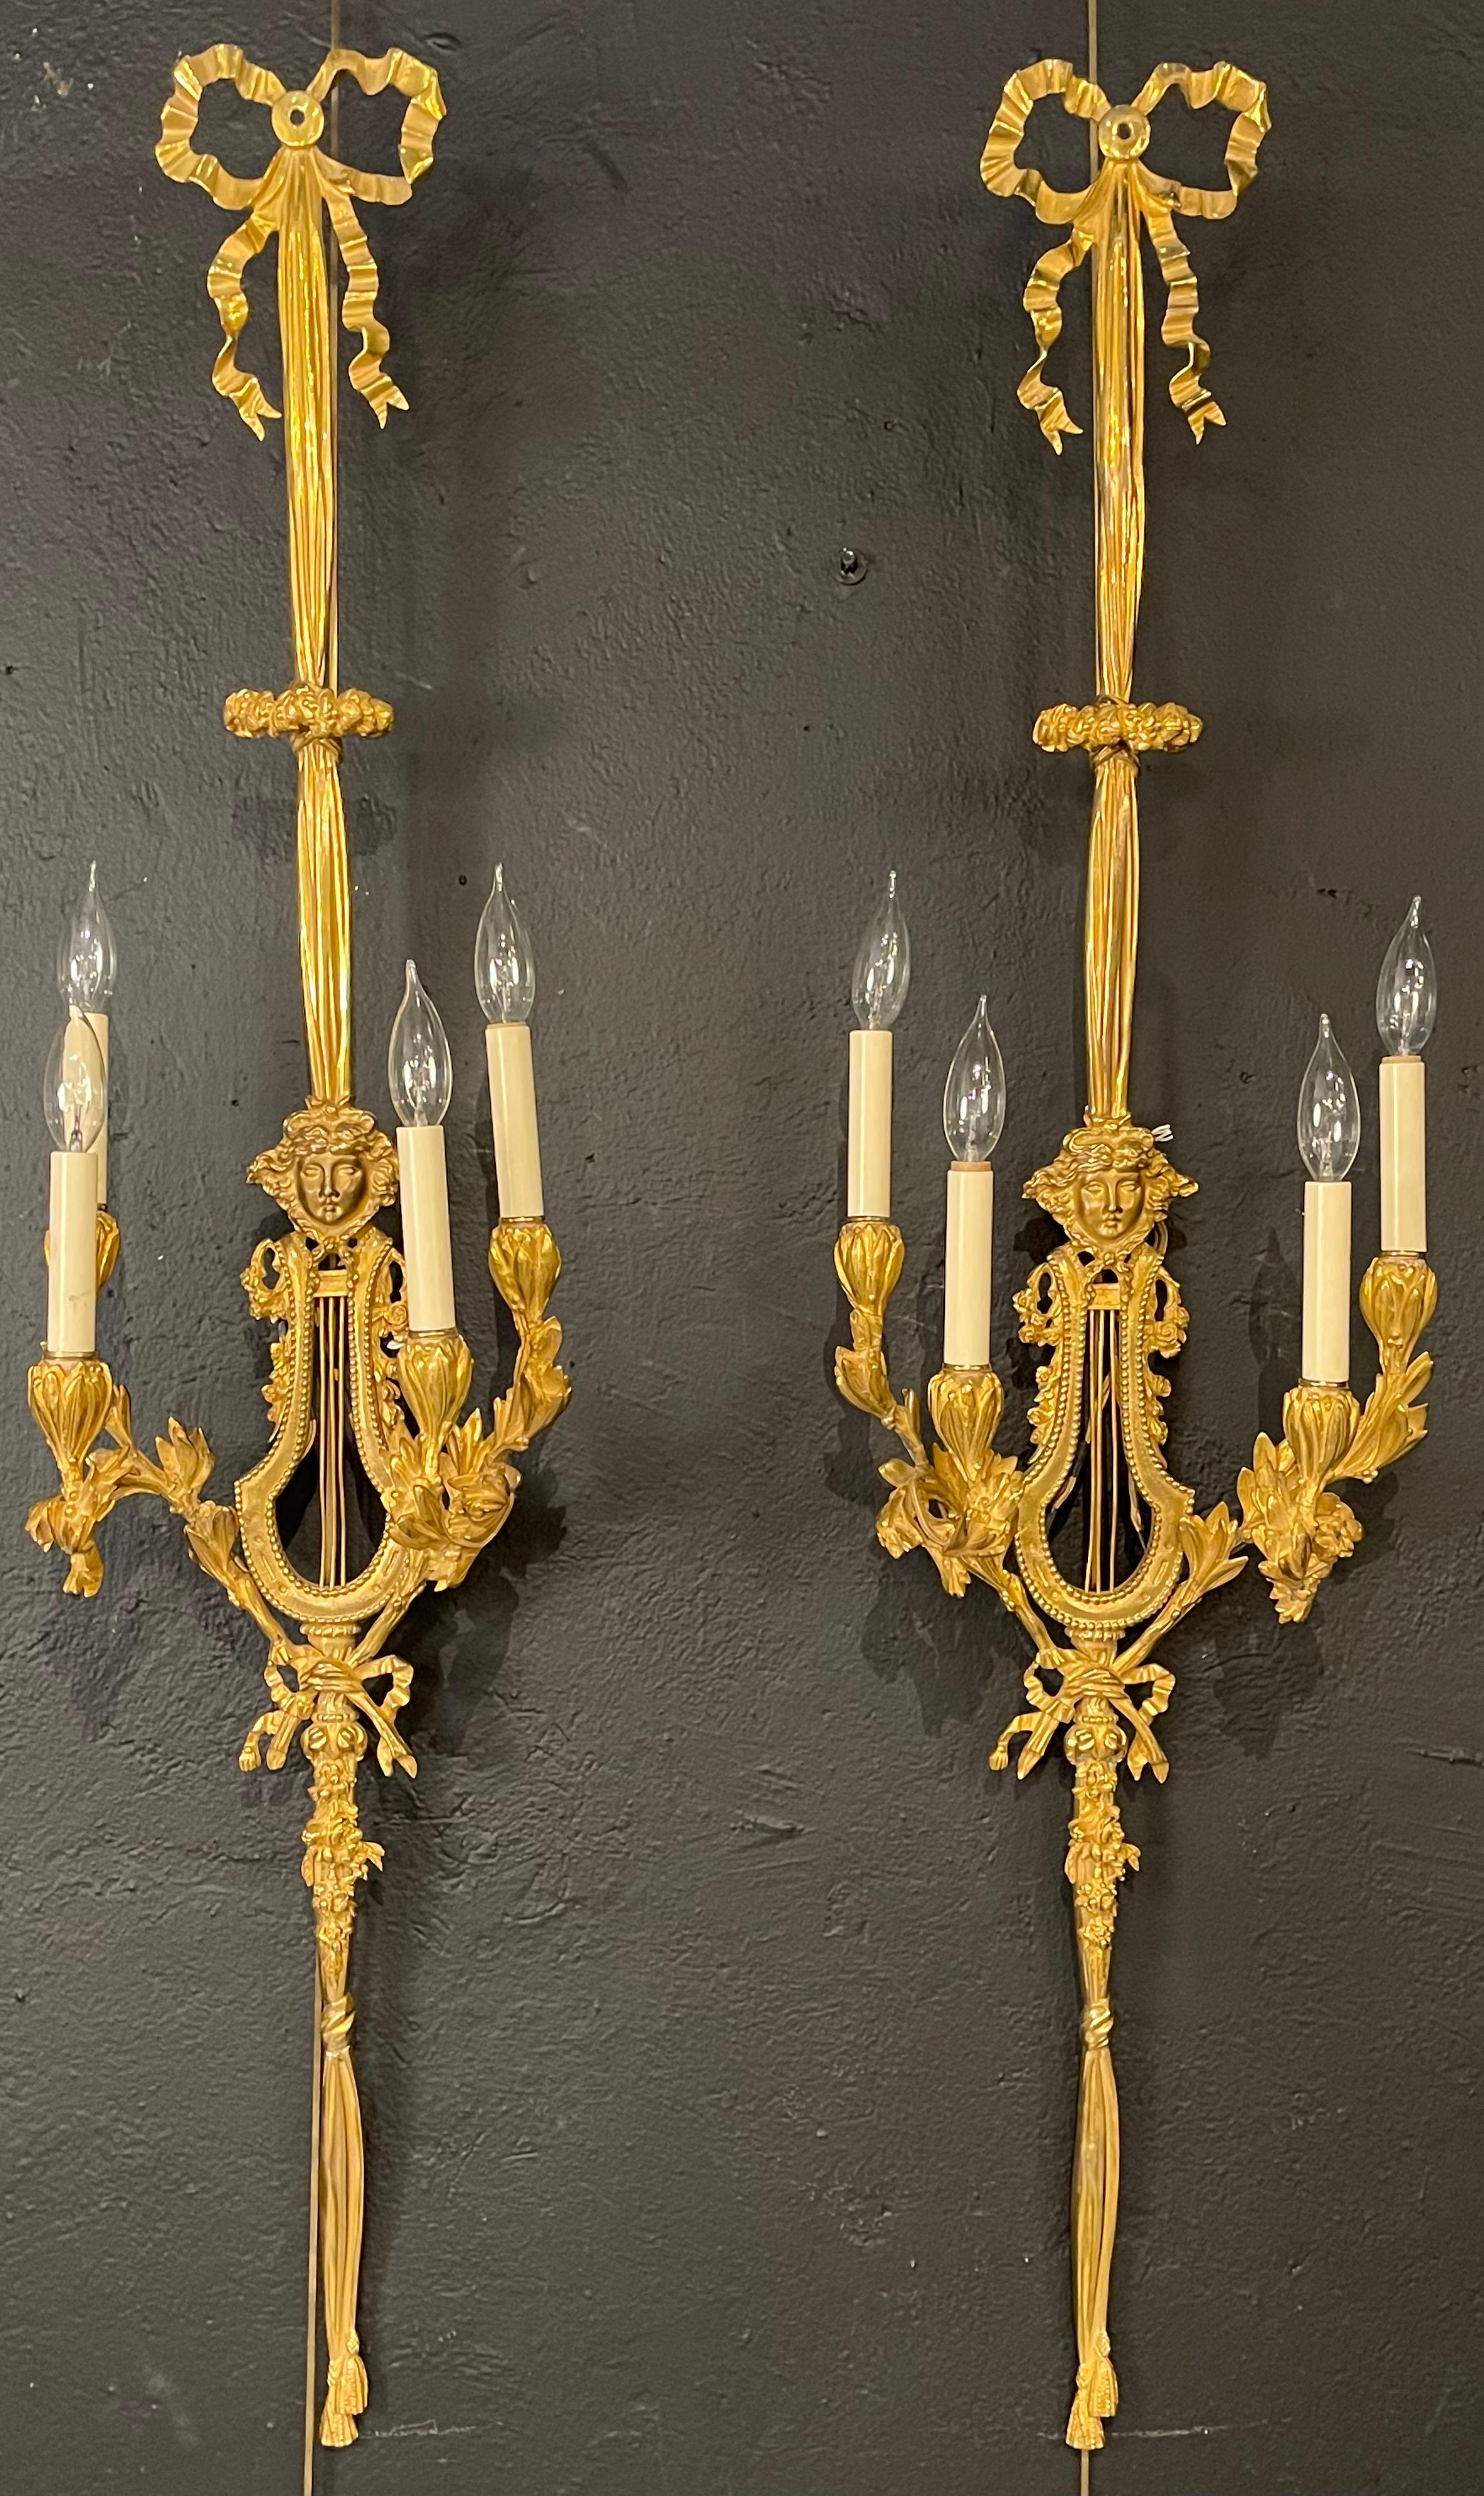 Pair of Louis XVI style doré bronze wall sconces. This stunning pair of monumental ribbon and tassel form wall sconces are sure to take your breath away. Straight from a Greenwich CT mansion bearing the finest of gilt bronze come this large and